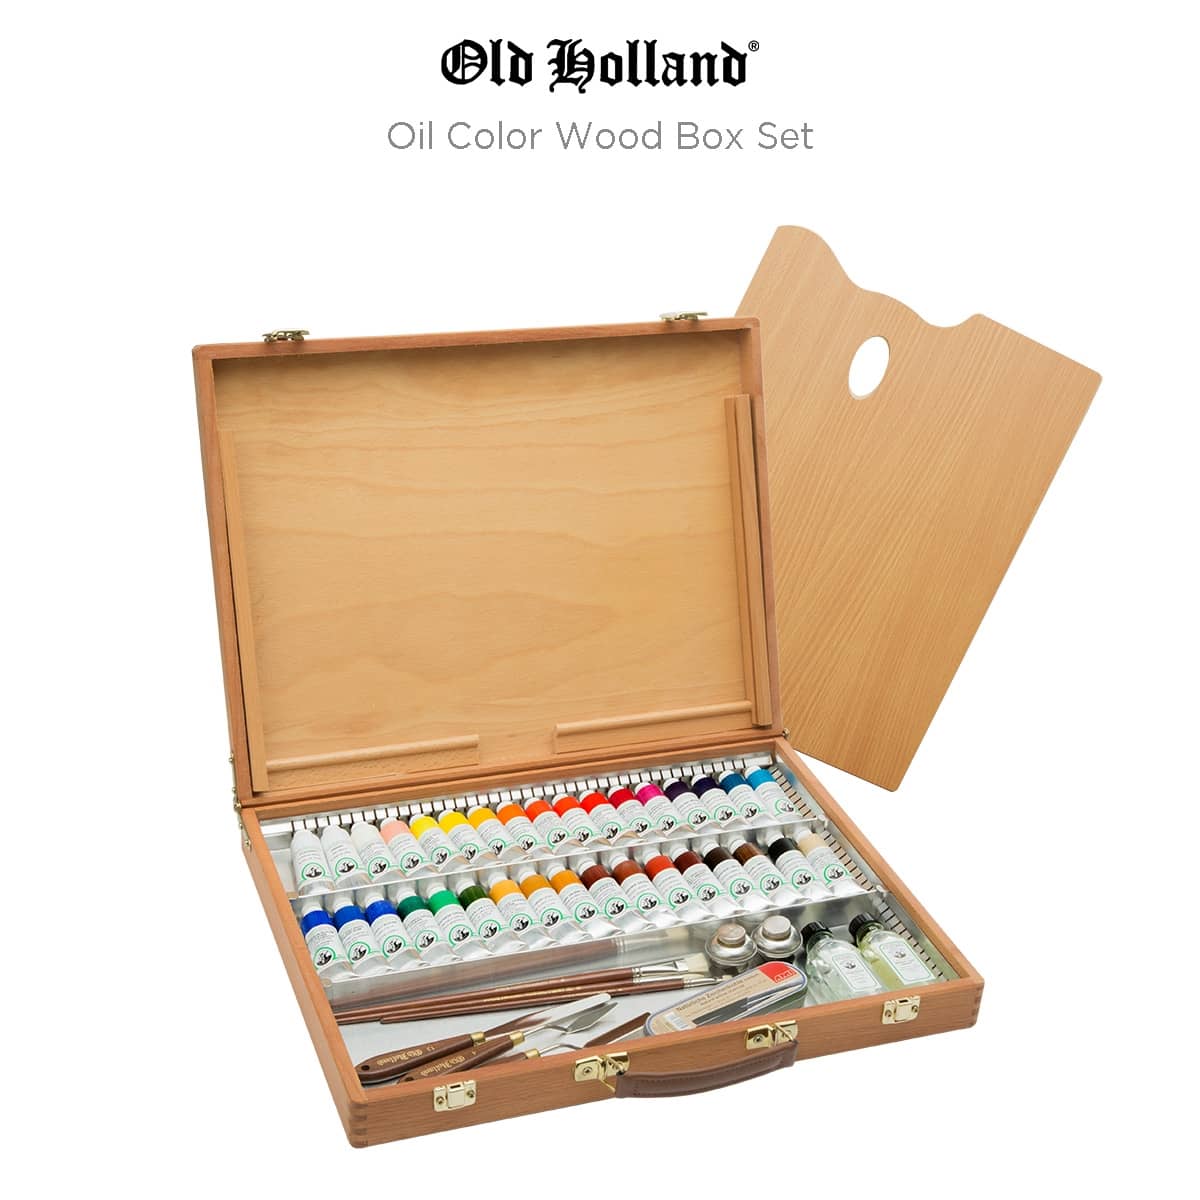 Old Holland Masters Oil Color Wood Box Set of 34